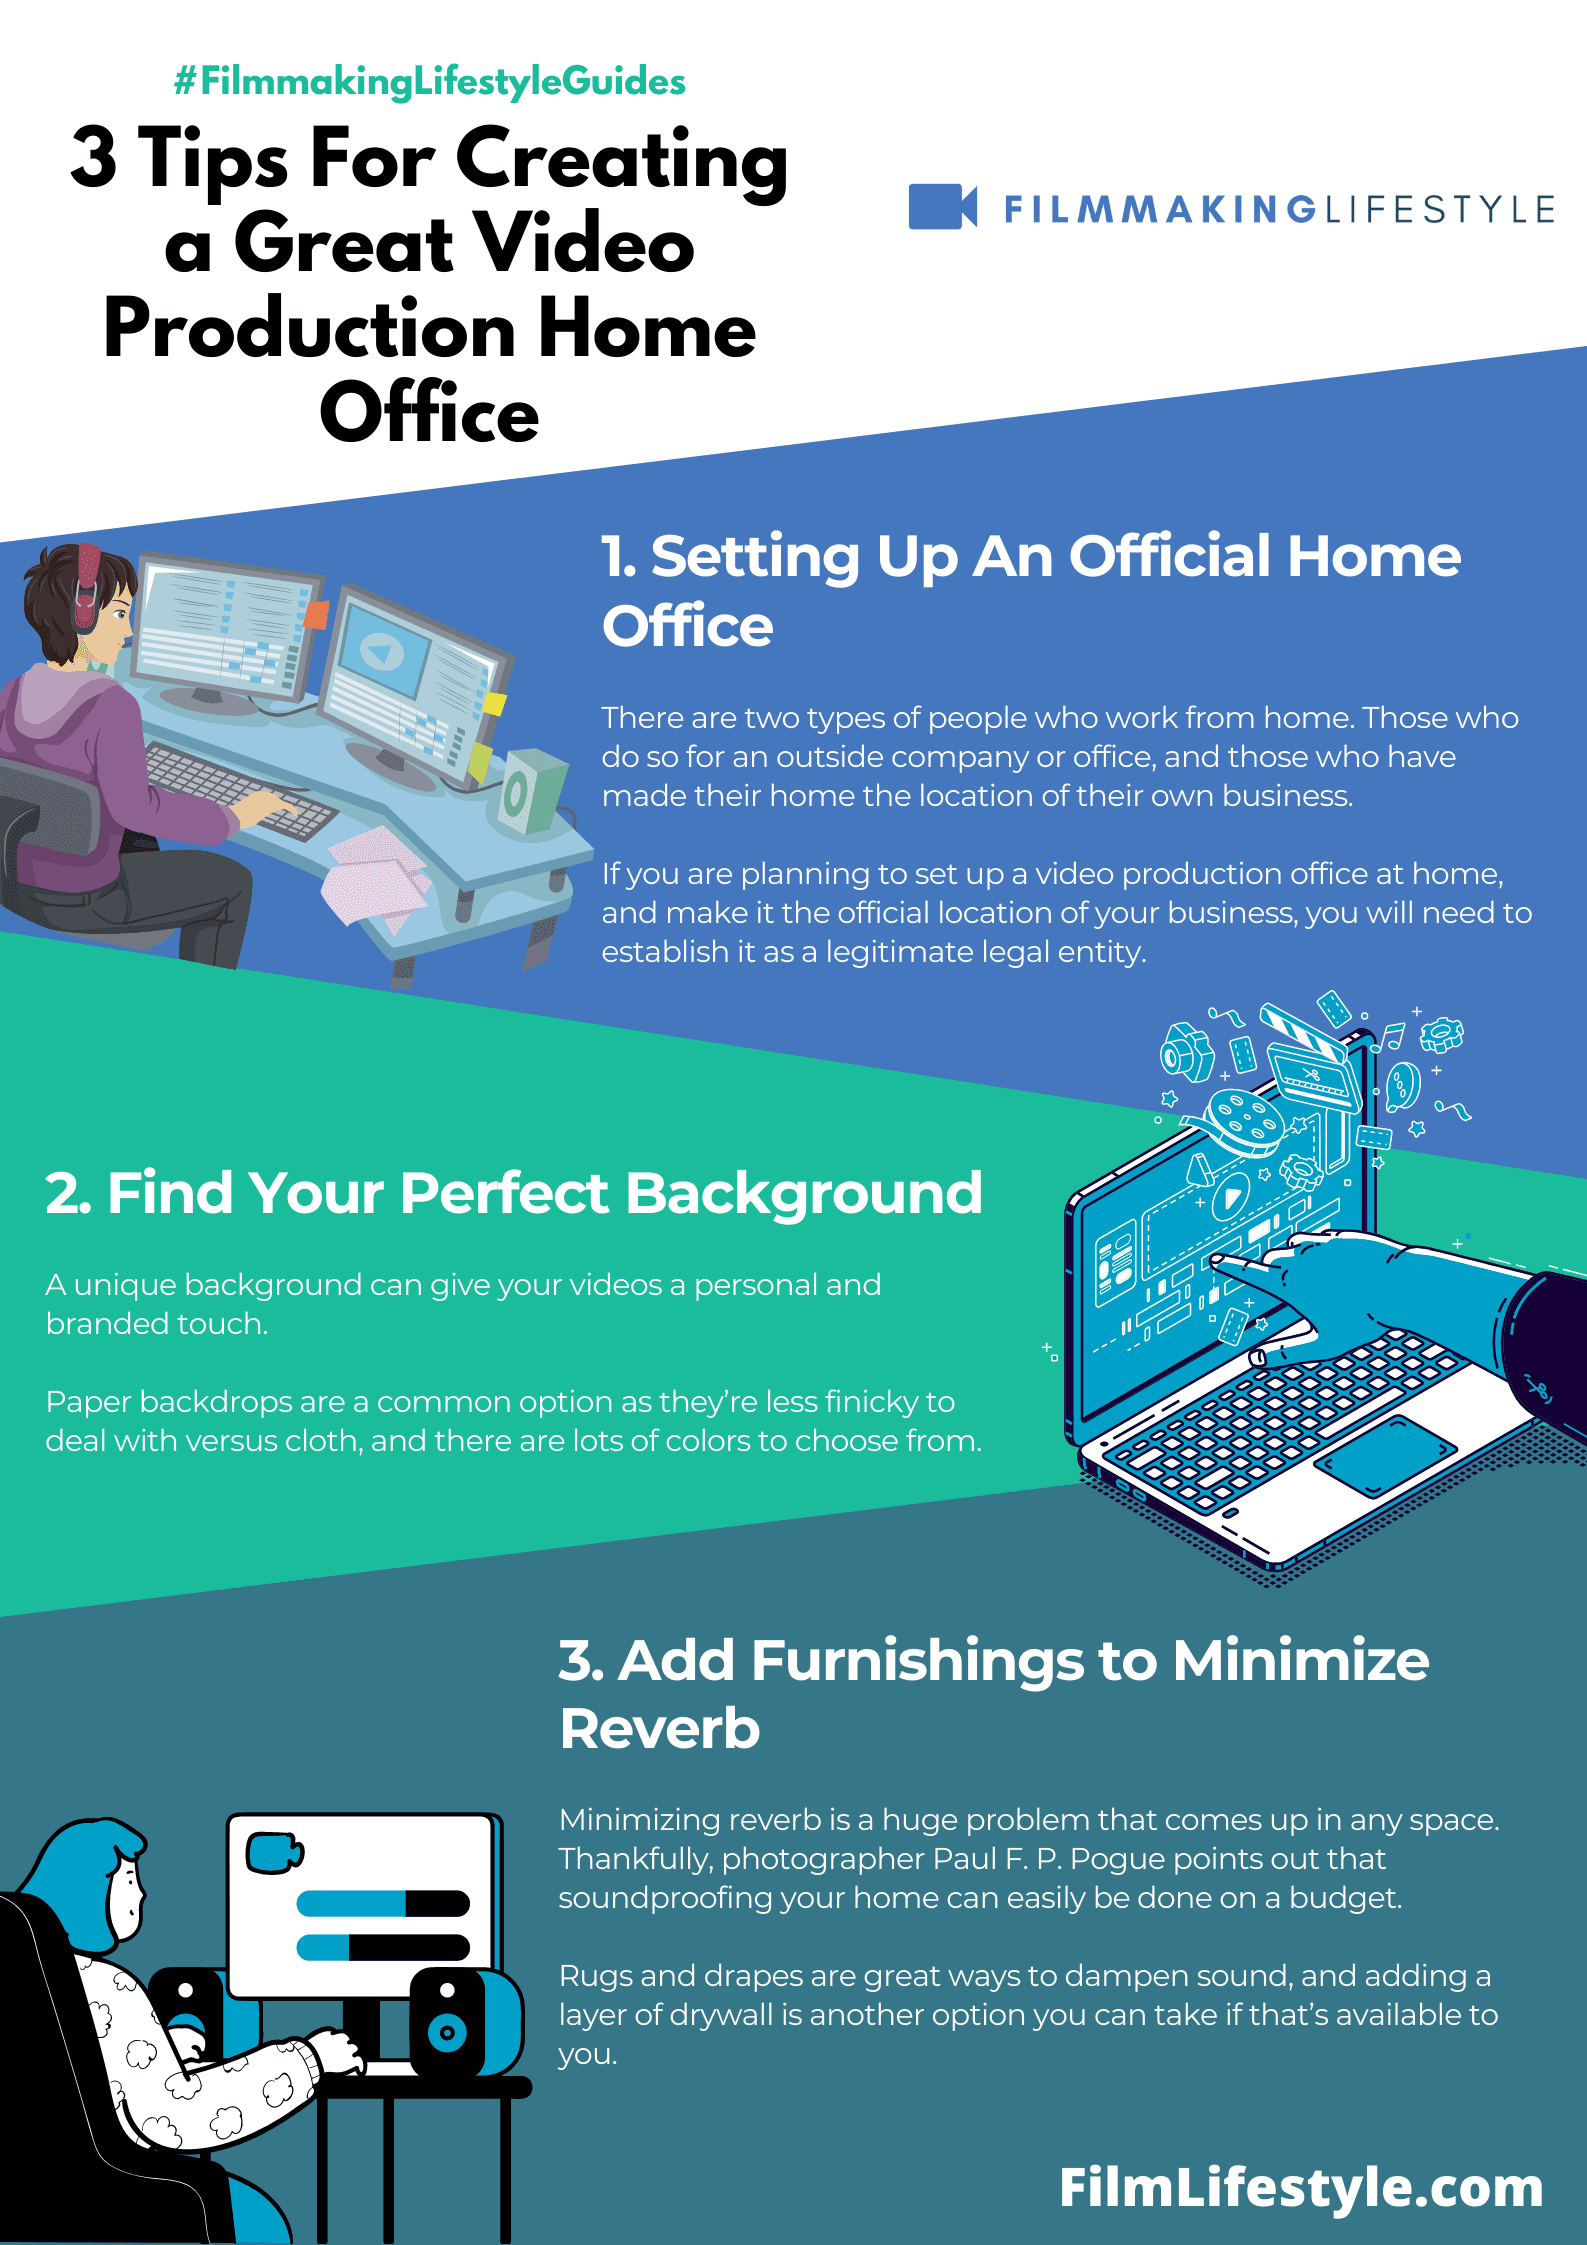 Creating a Great Video Production Home Office